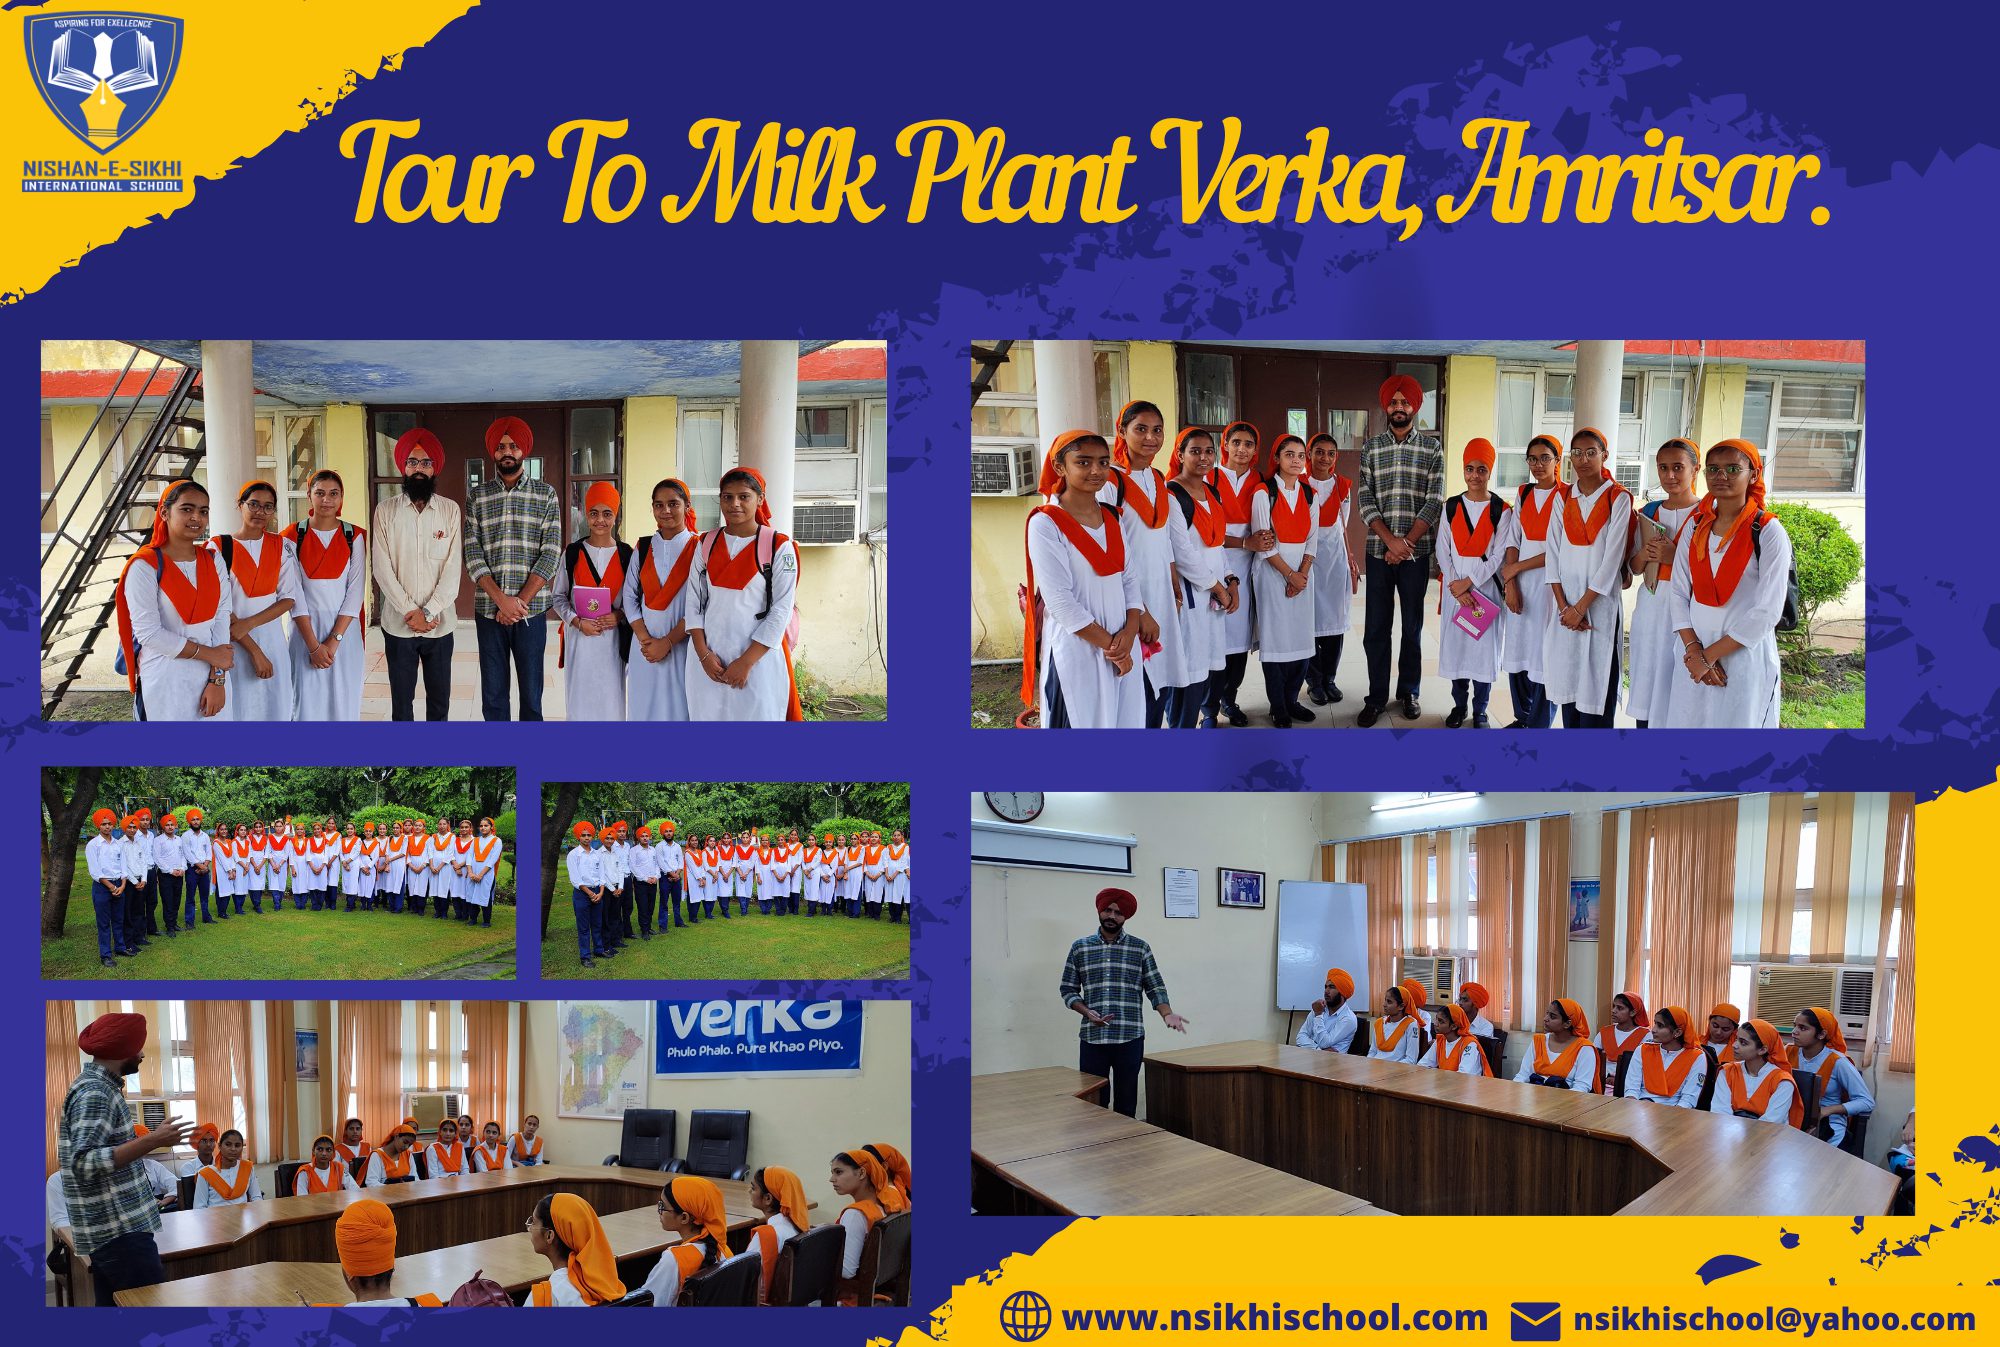 You are currently viewing Tour To Milk Plant Verka, Amritsar